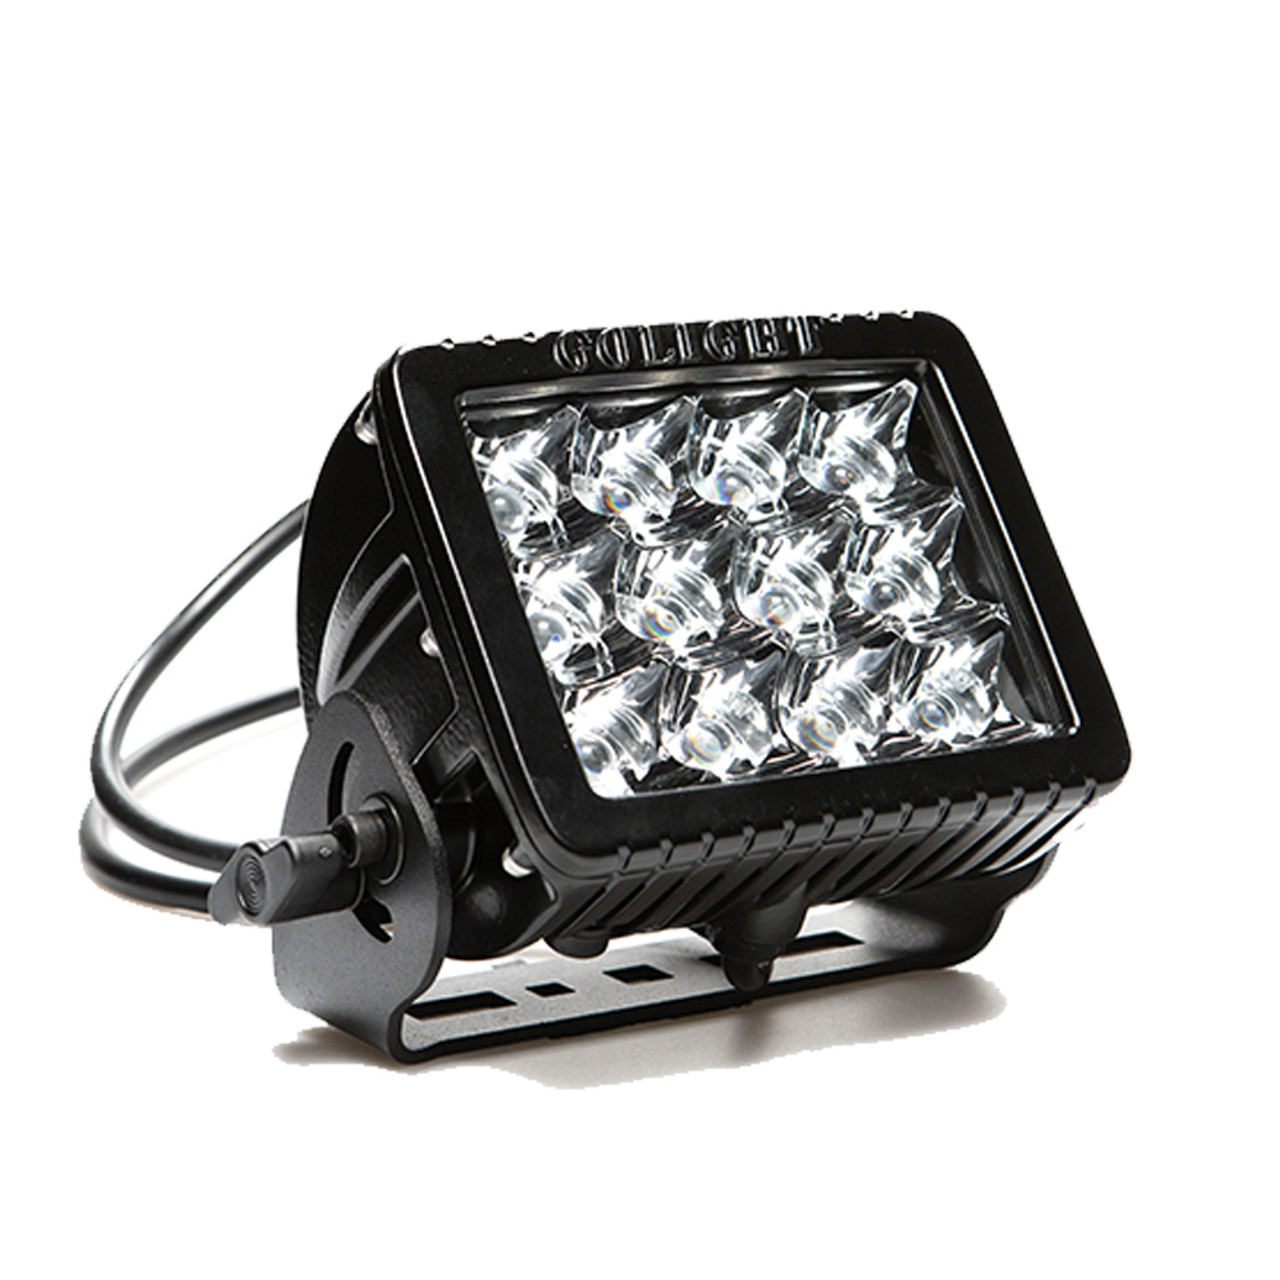 Golight 4411 GXL Permanent Mount LED Spotlight includes Mounting Hardware and Rockguard Lens Cover Black